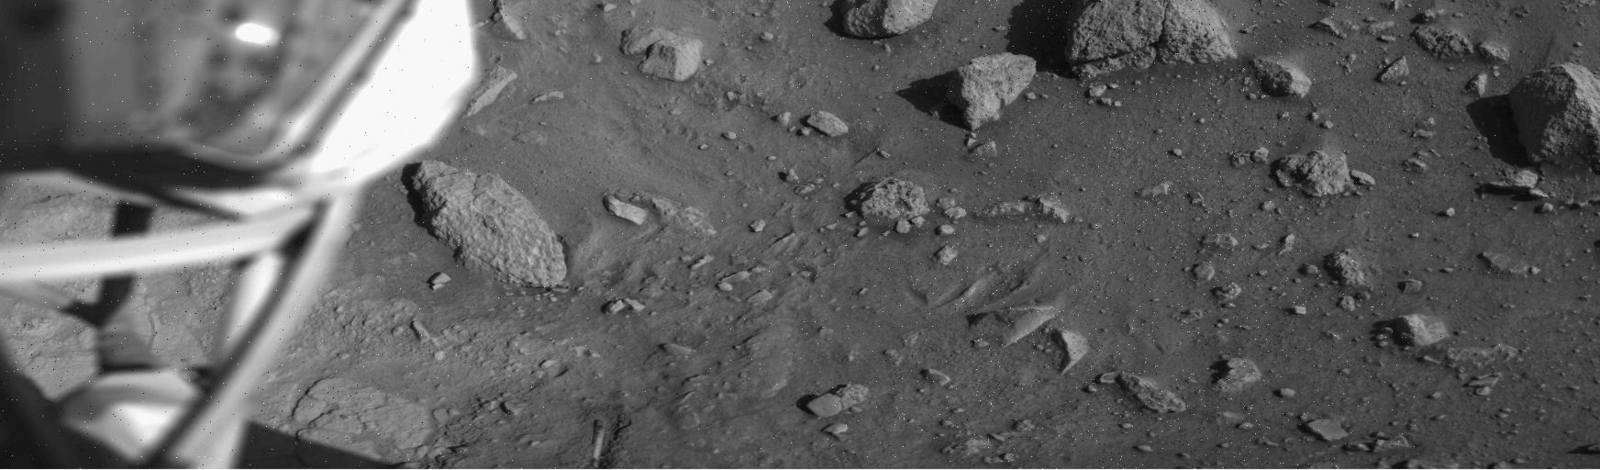 This image was taken by Viking Lander 1 on August 1, 1976, 12 sols after landing.